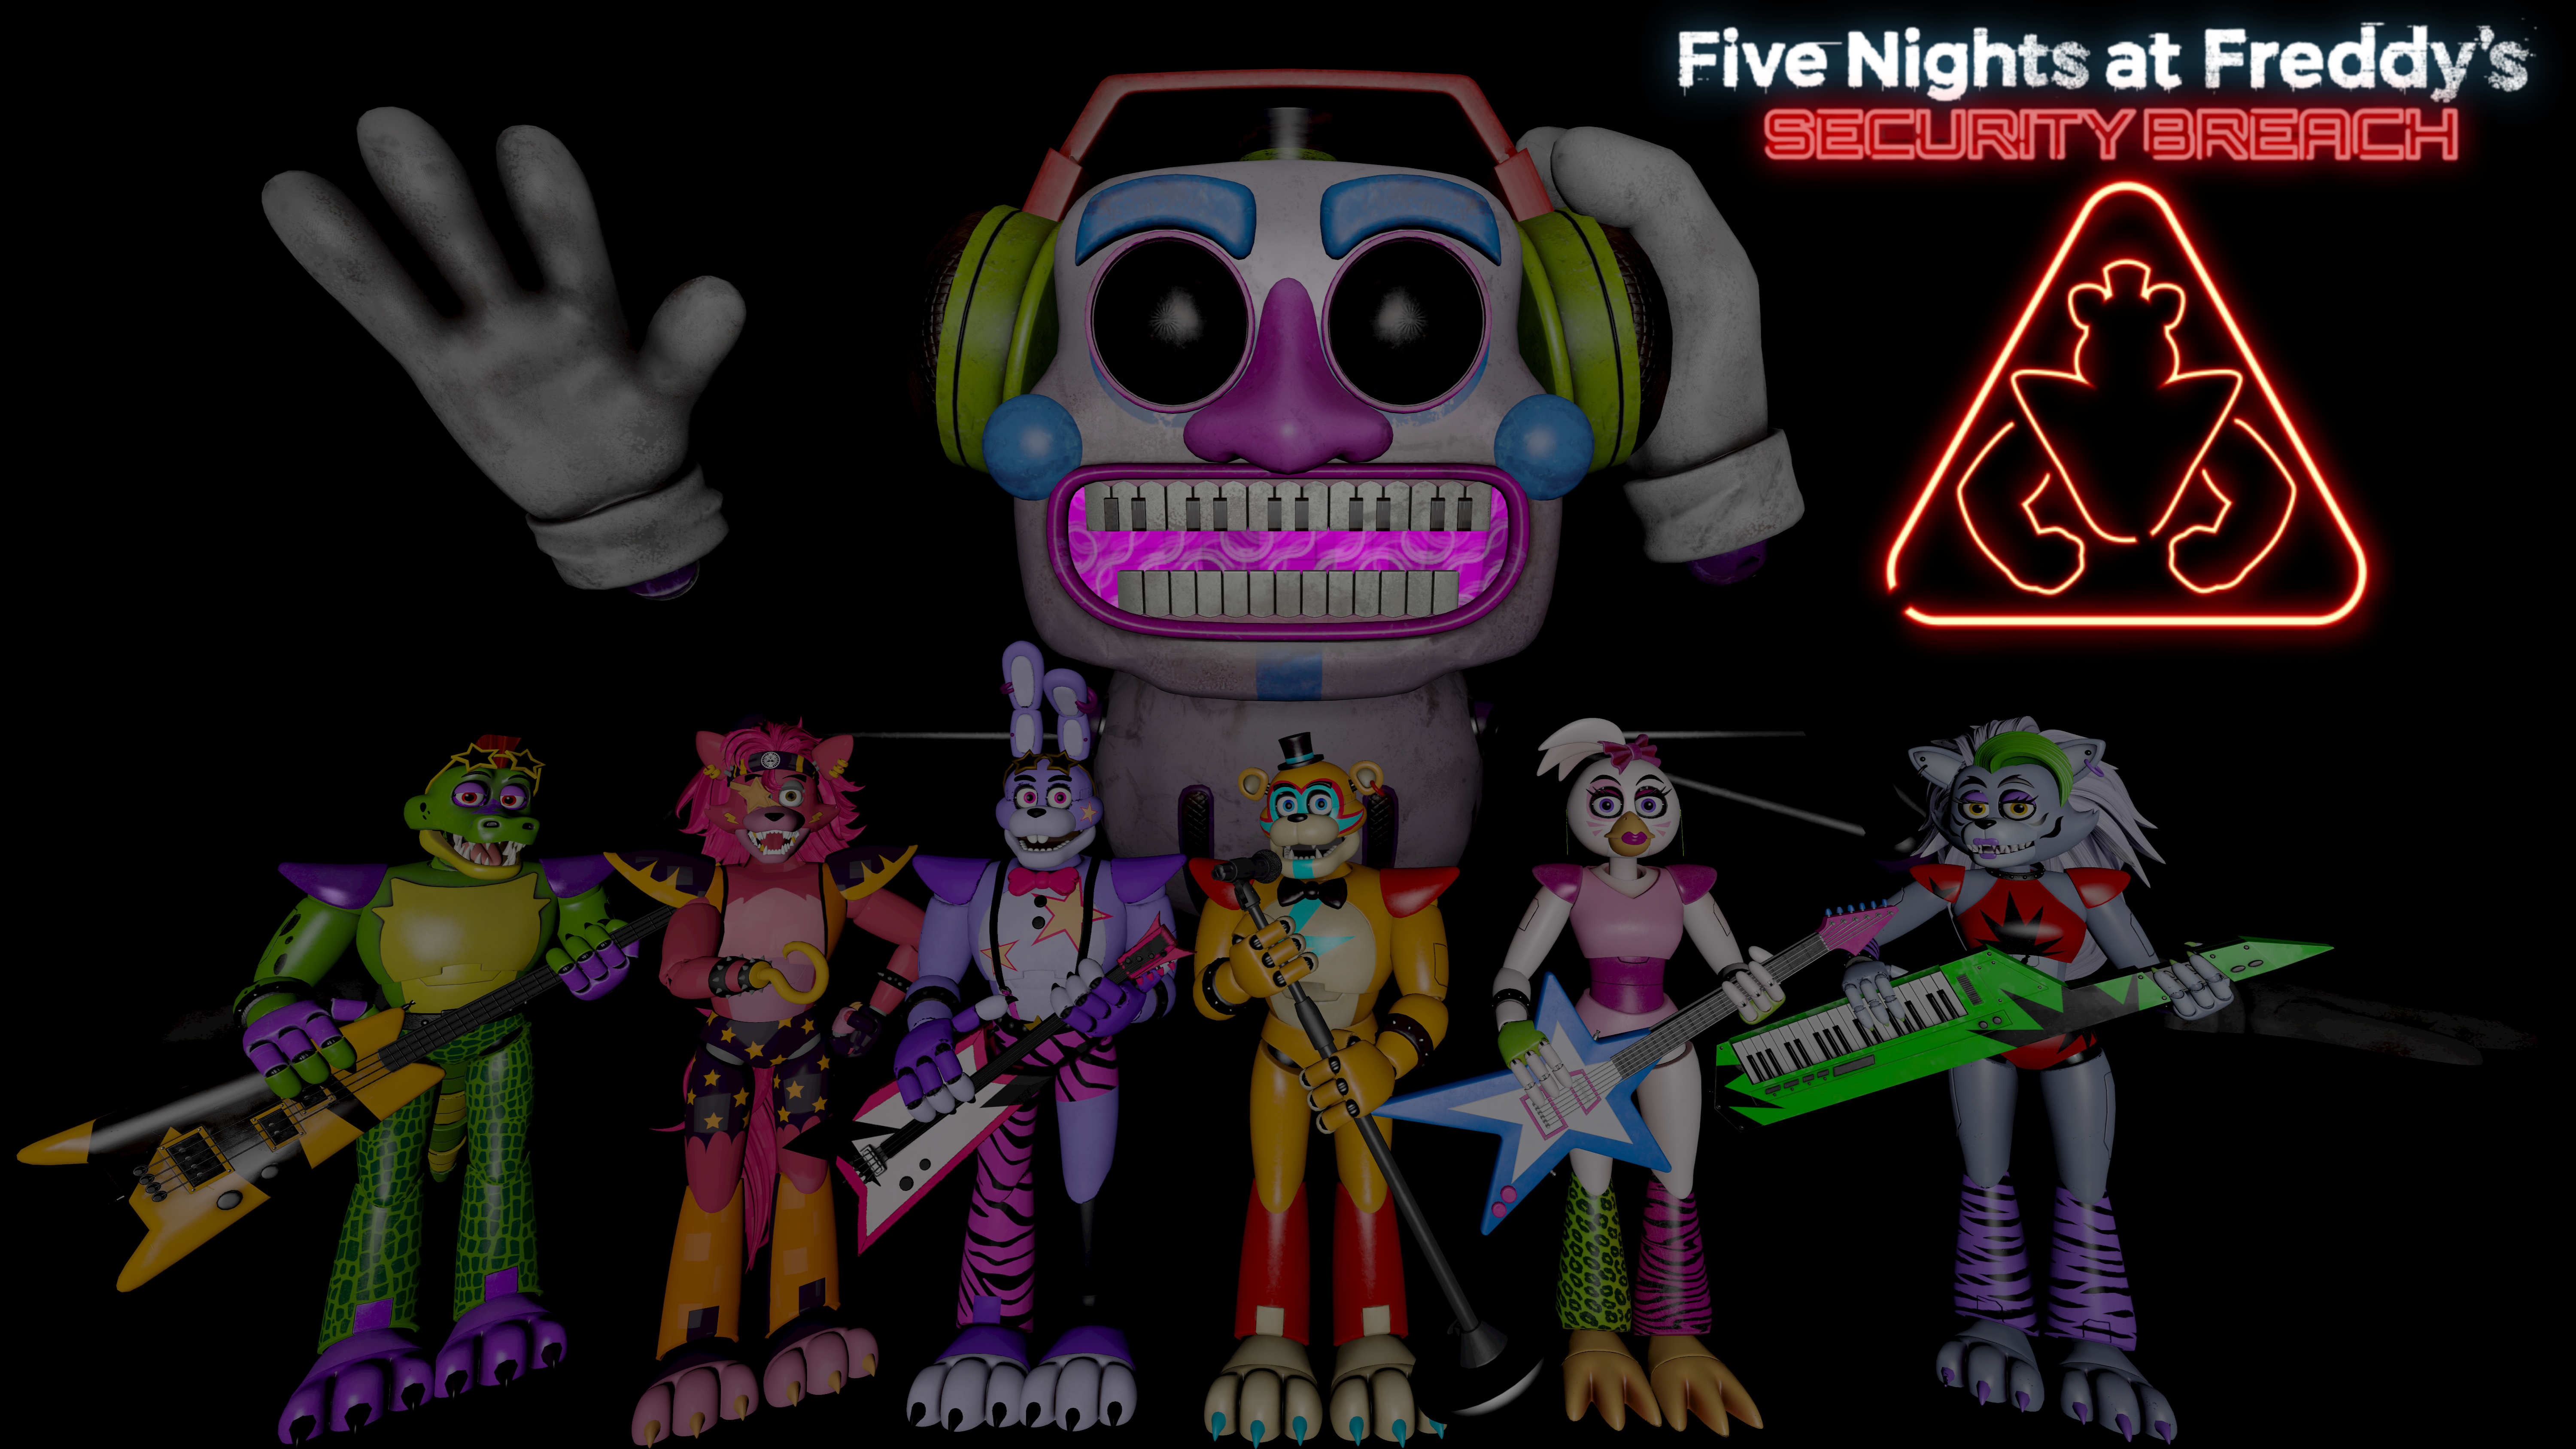 My Favorites Characters Of FNAF 3 V3 by mauricio2006 on DeviantArt